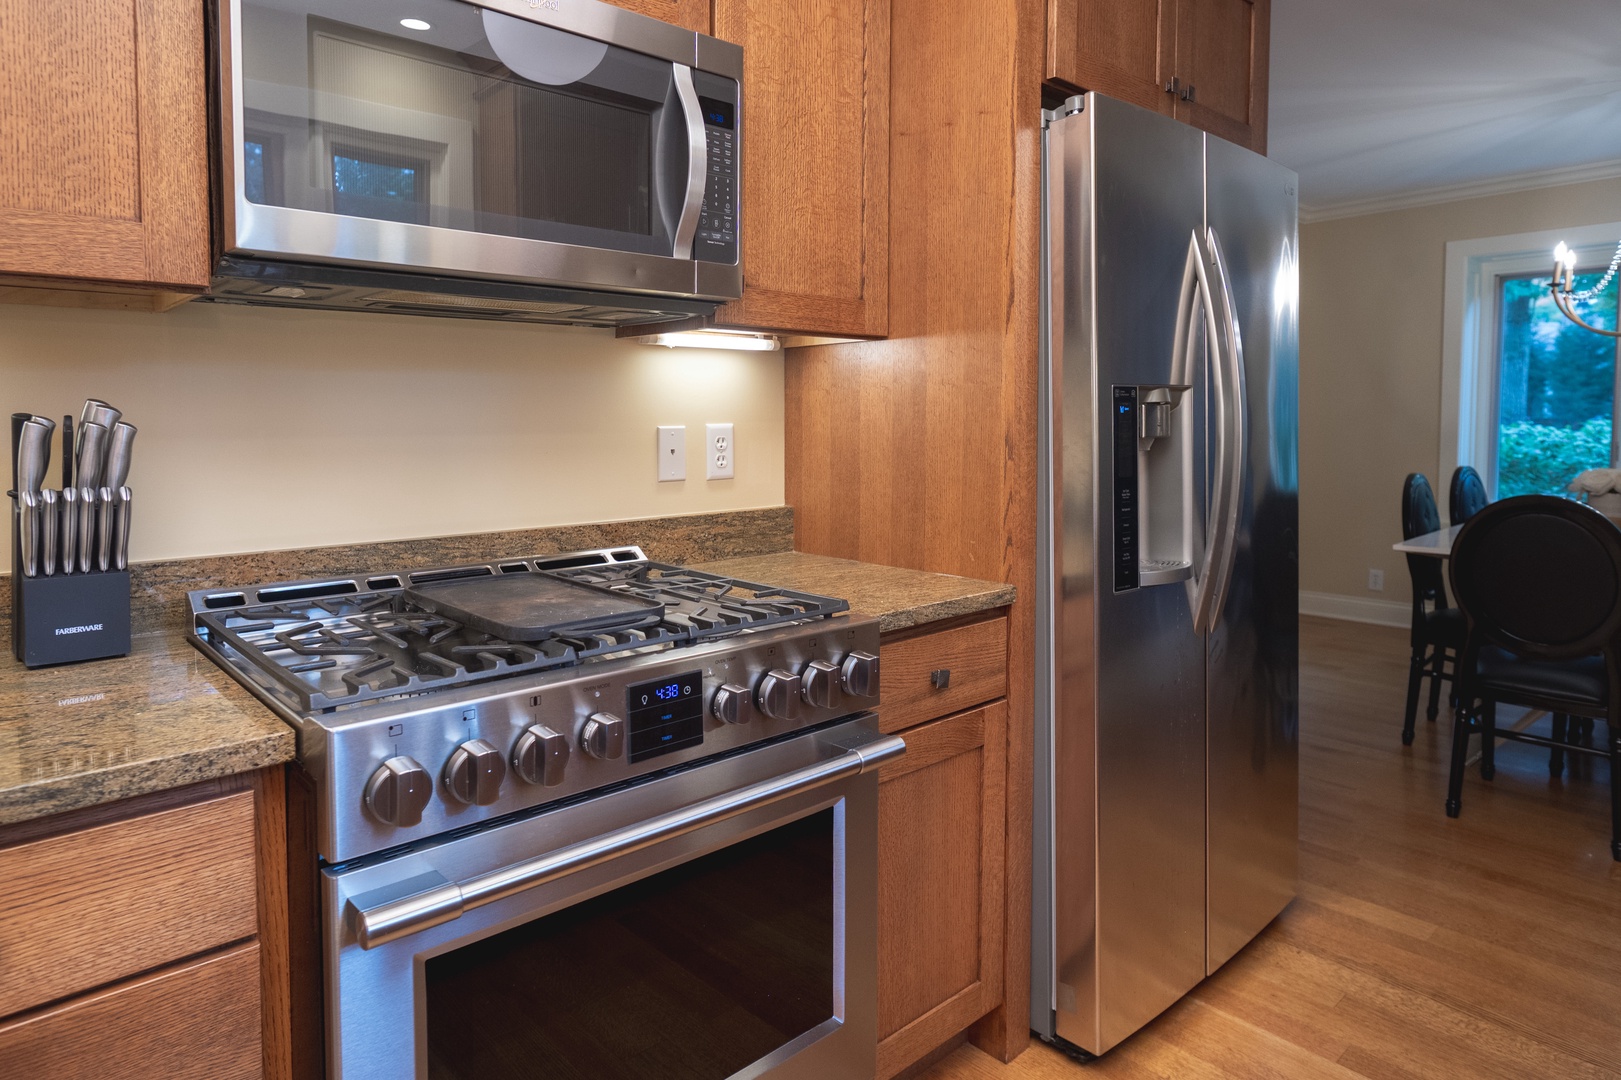 The fully equipped kitchen offers ample space & all the comforts of home